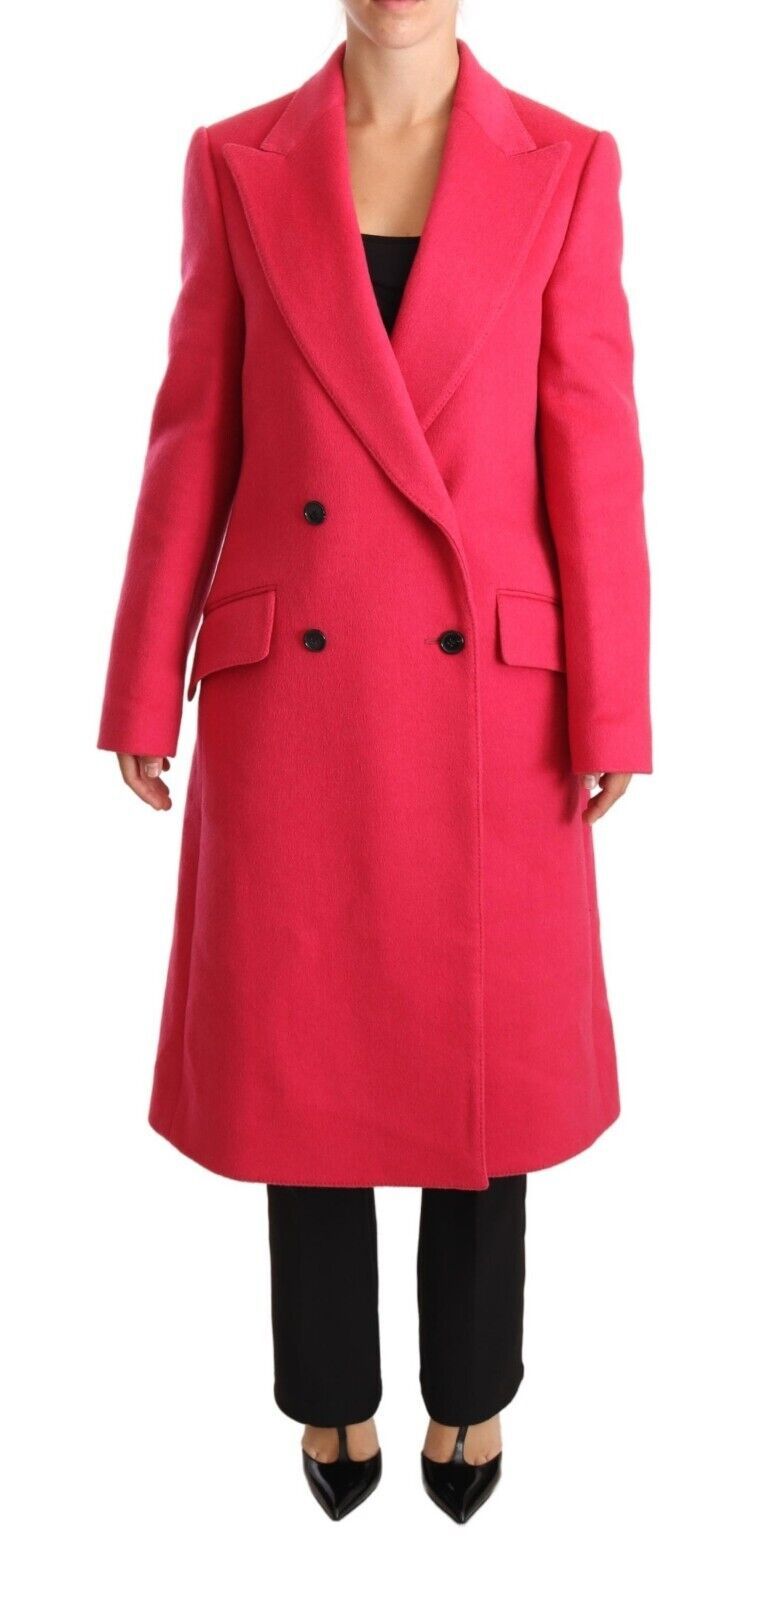 Dolce & Gabbana Pink Double Pinted Trenchcoat Jacket